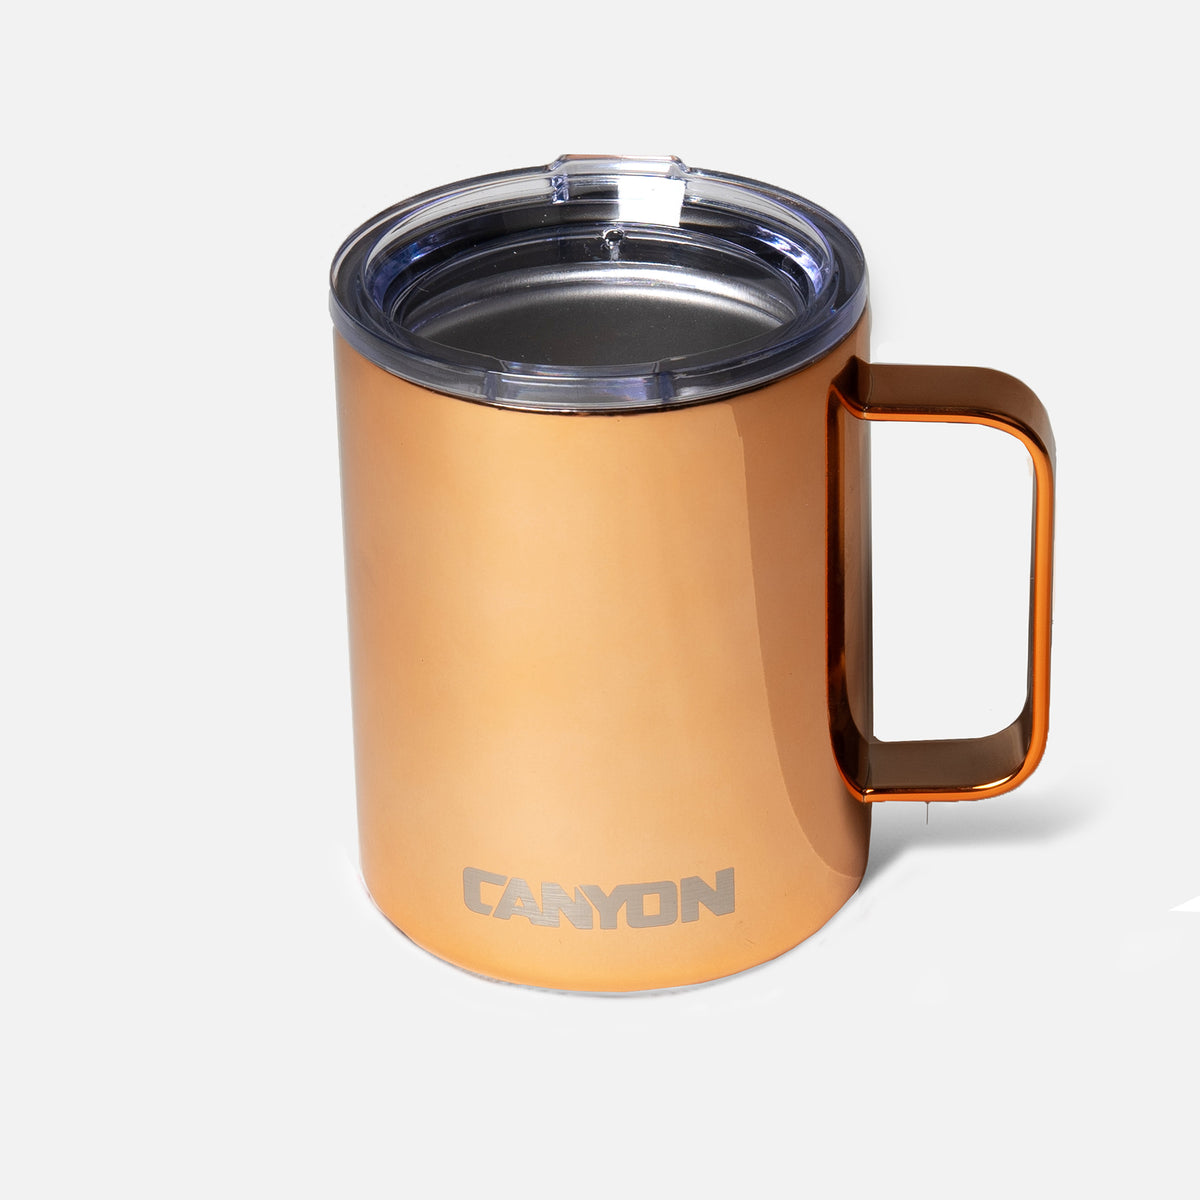 What is a Travel Mugs Vs. a Tumbler?